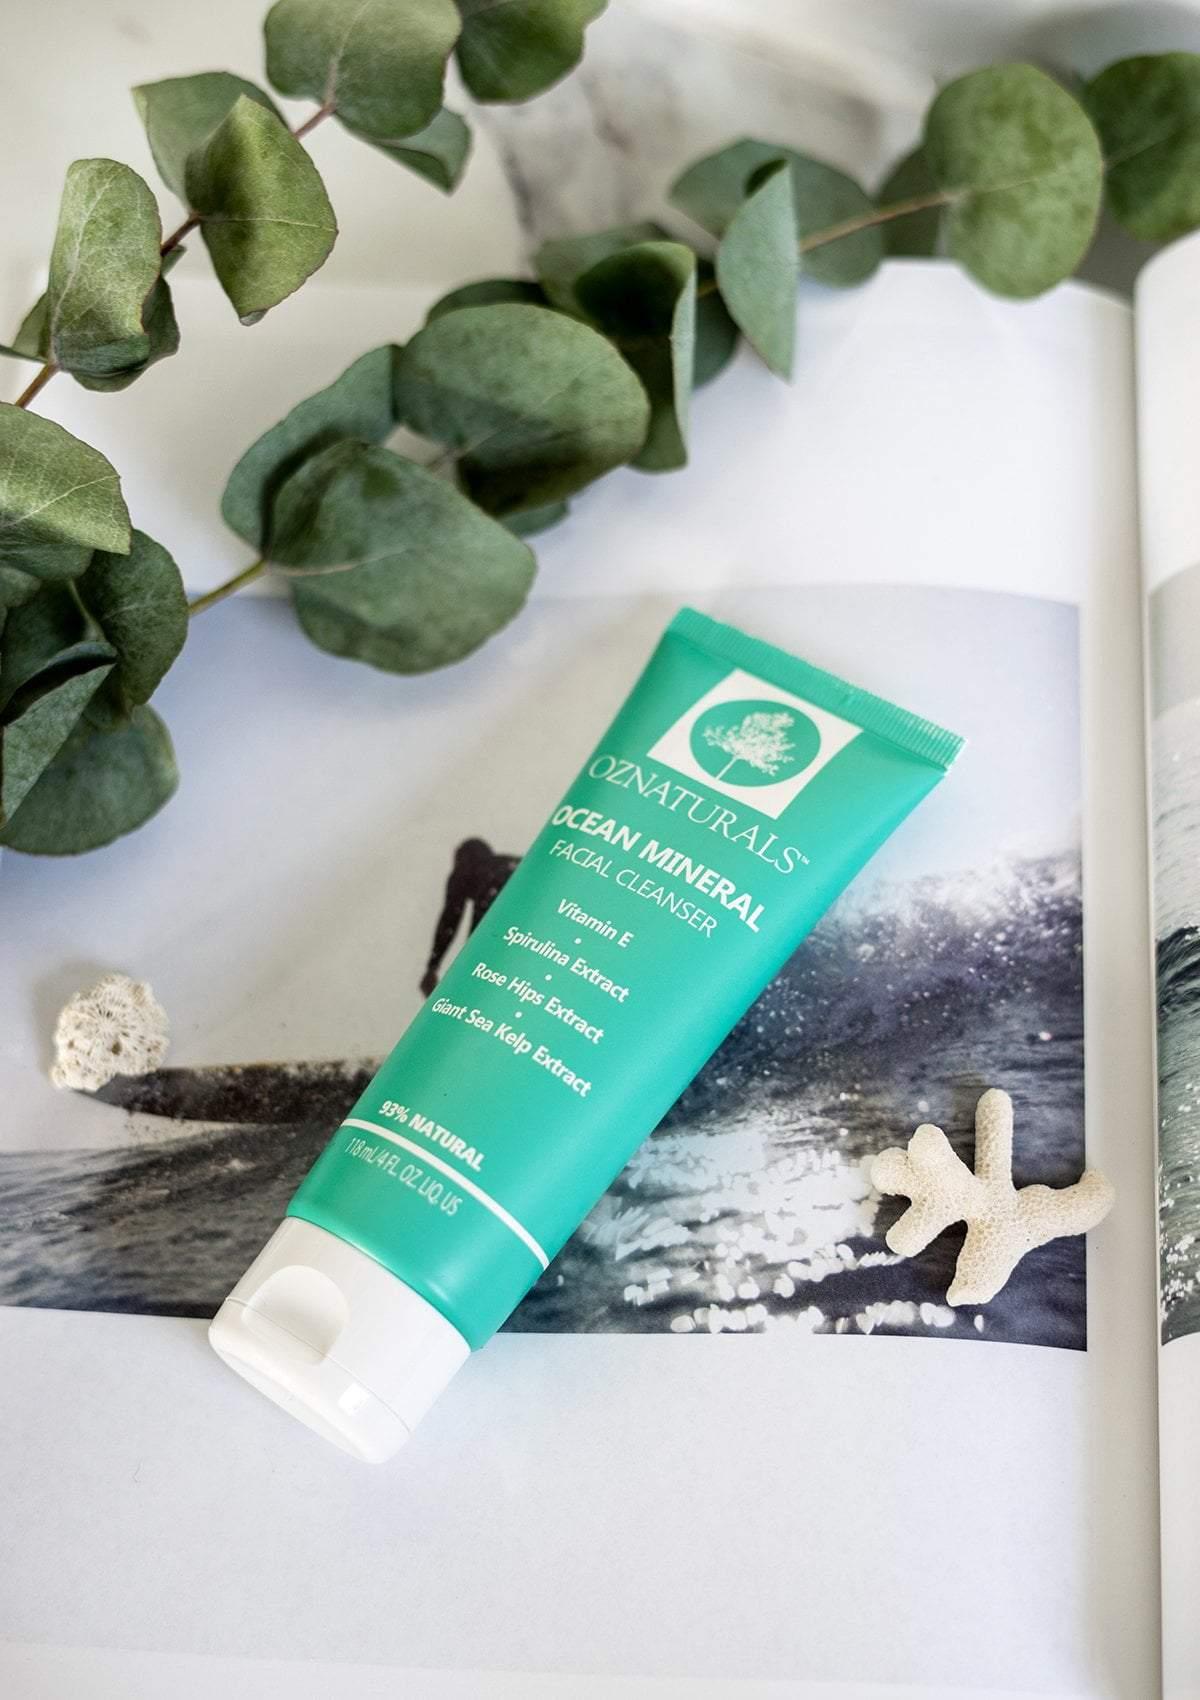 OCEAN MINERAL CLEANSER (BYE ZITS!) - BEST BY DATE REACHED — 03/31/2023 - OZNaturals